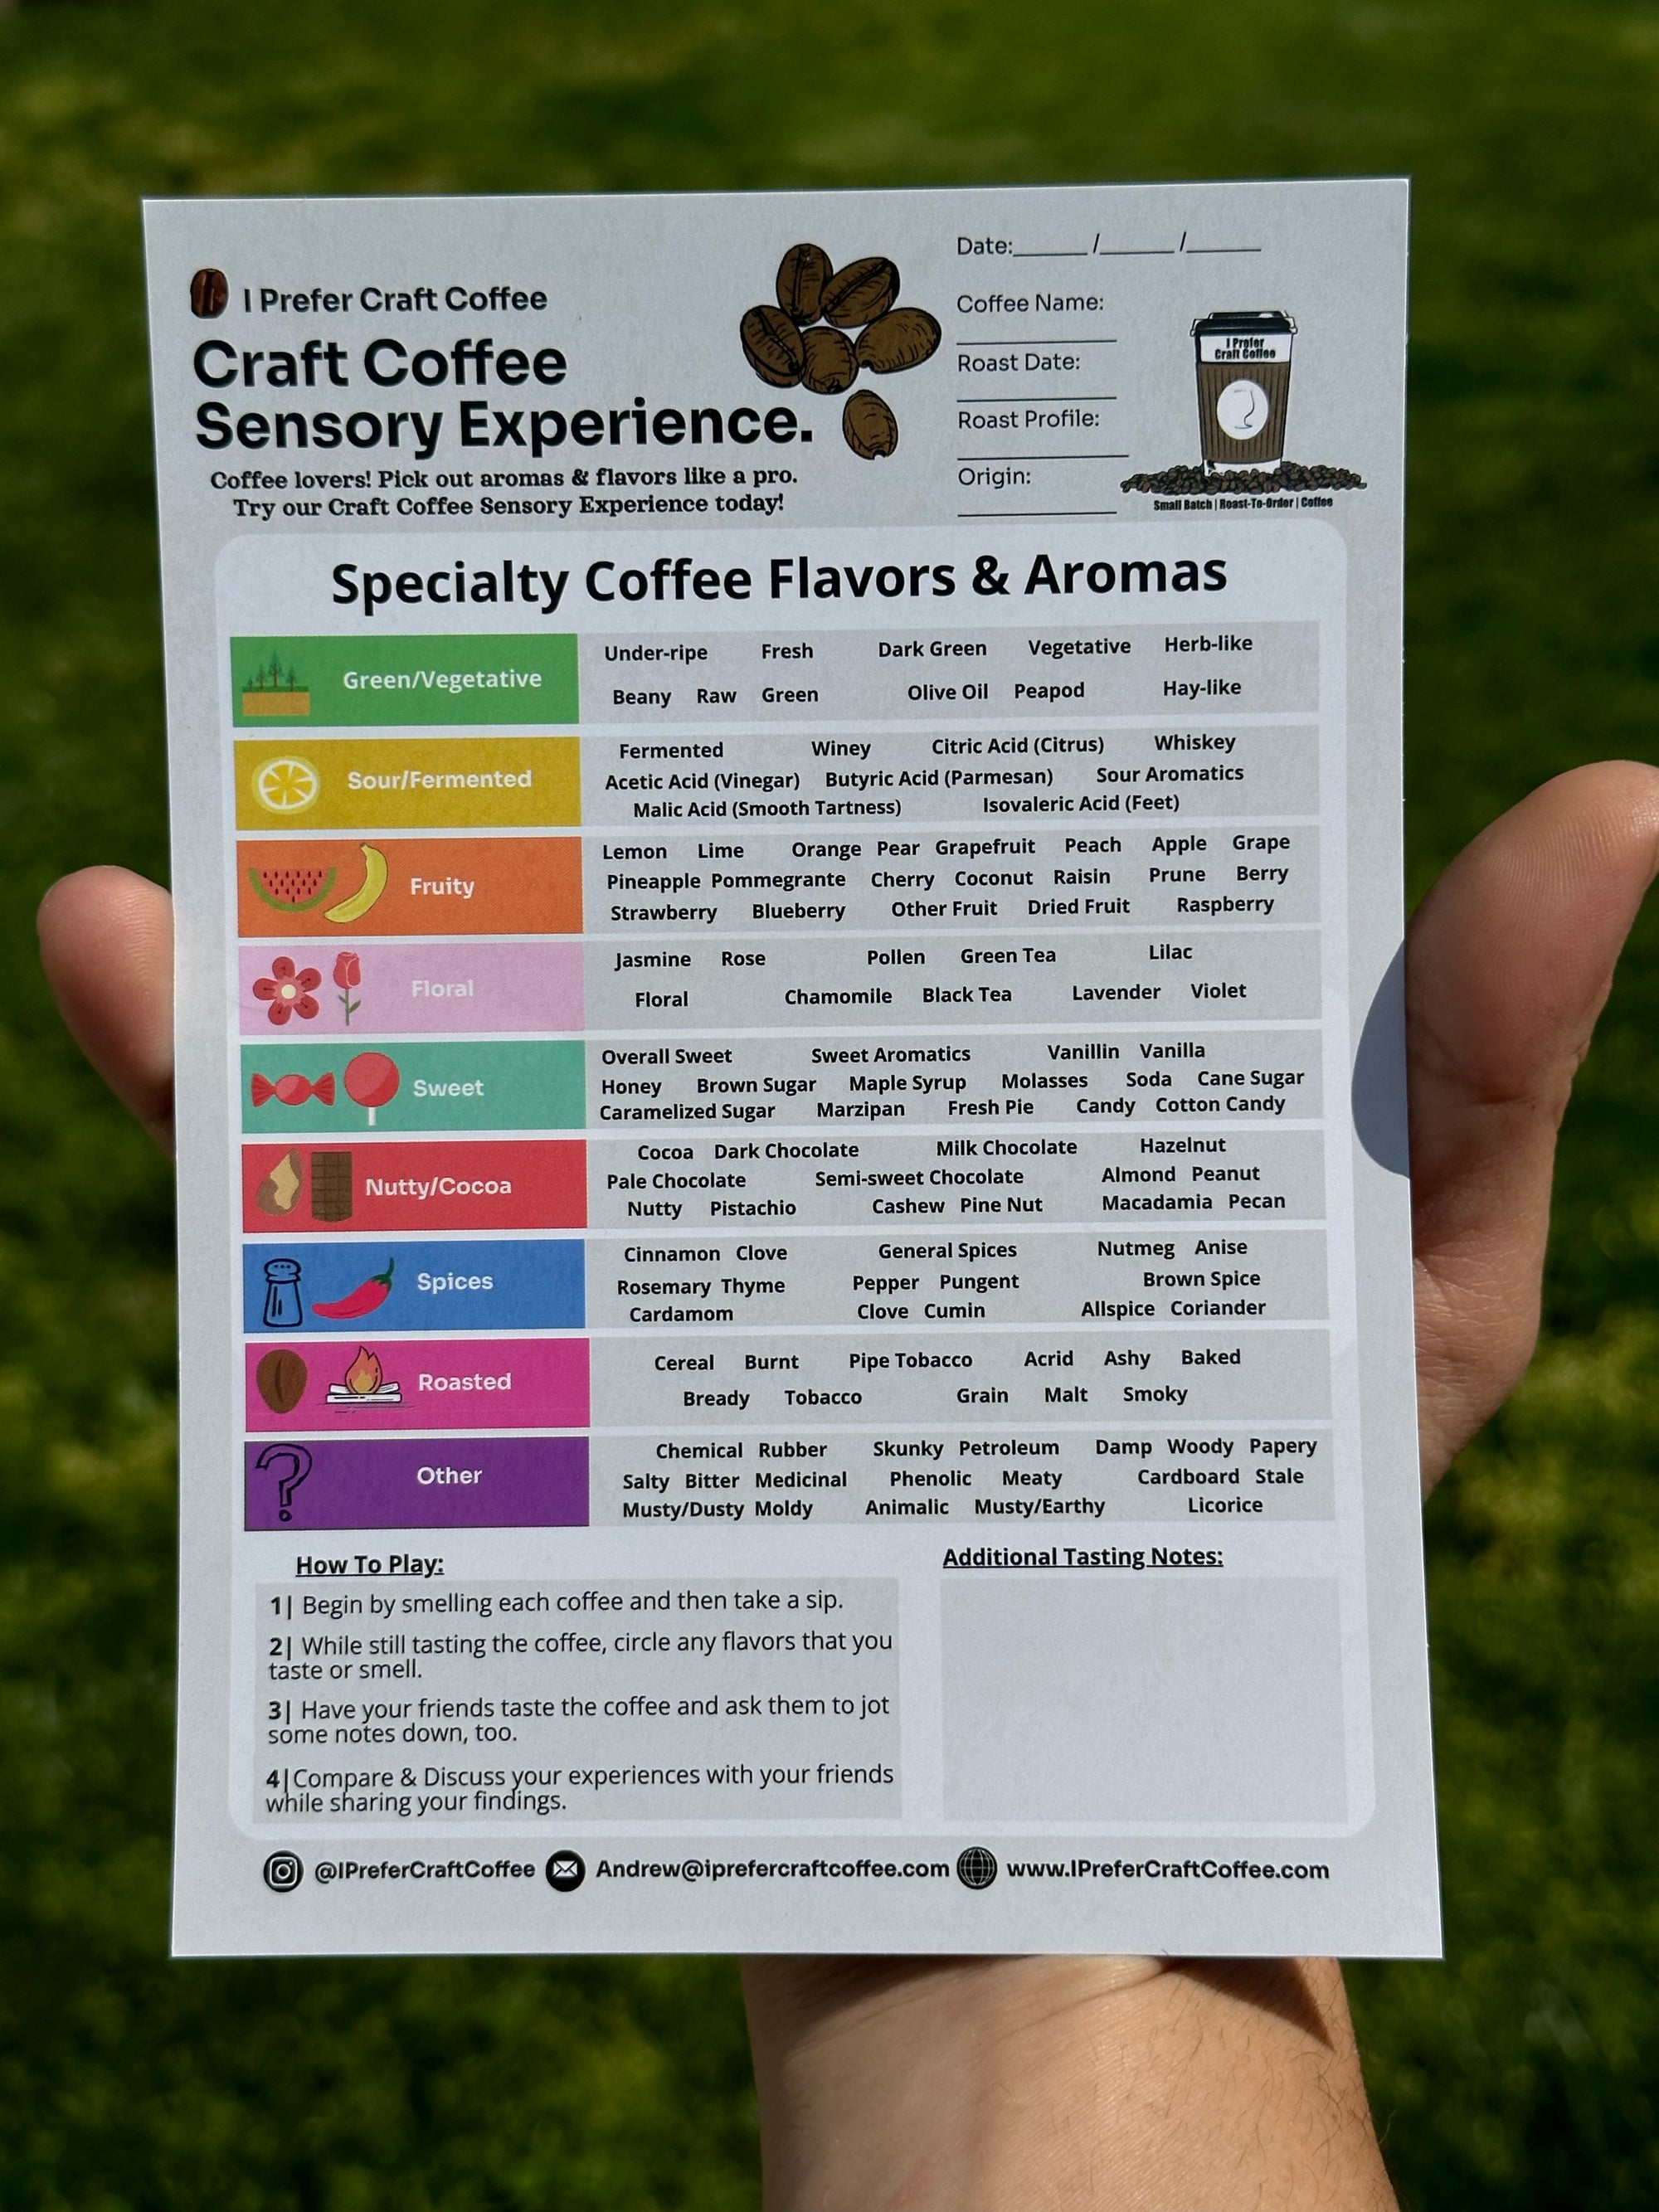 Craft Coffee vs Specialty Coffee: What's the Difference?